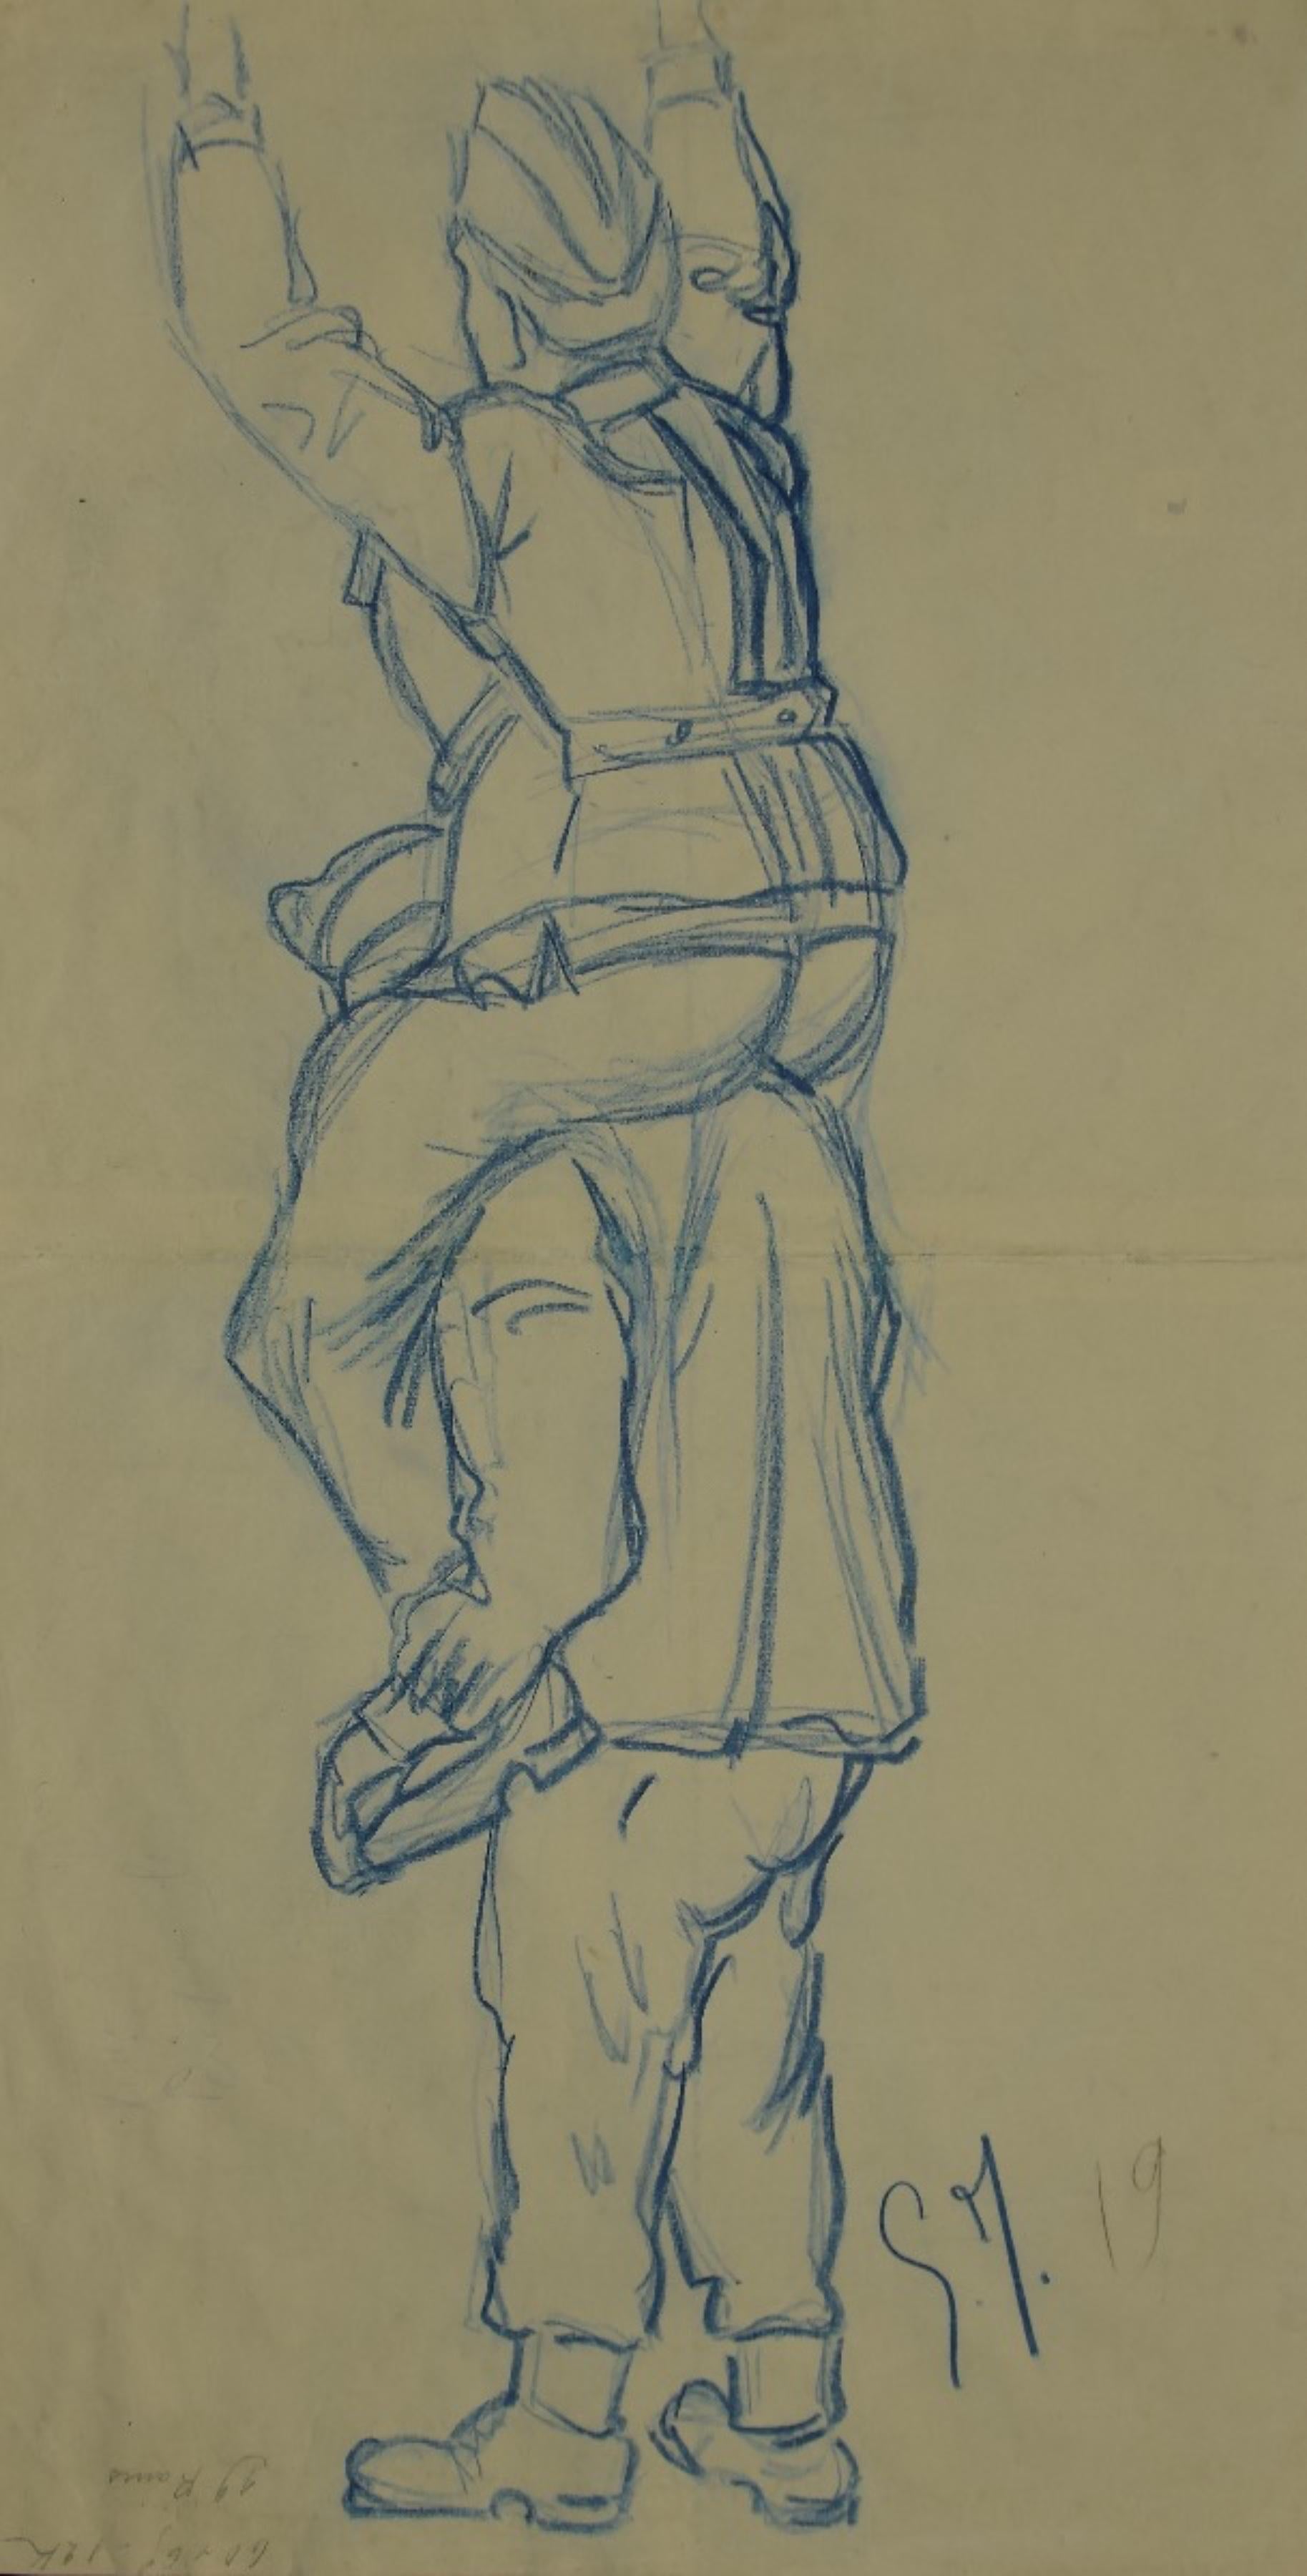 Unknown Figurative Art - Soldiers - Pencil and Pastel - Mid-20th Century